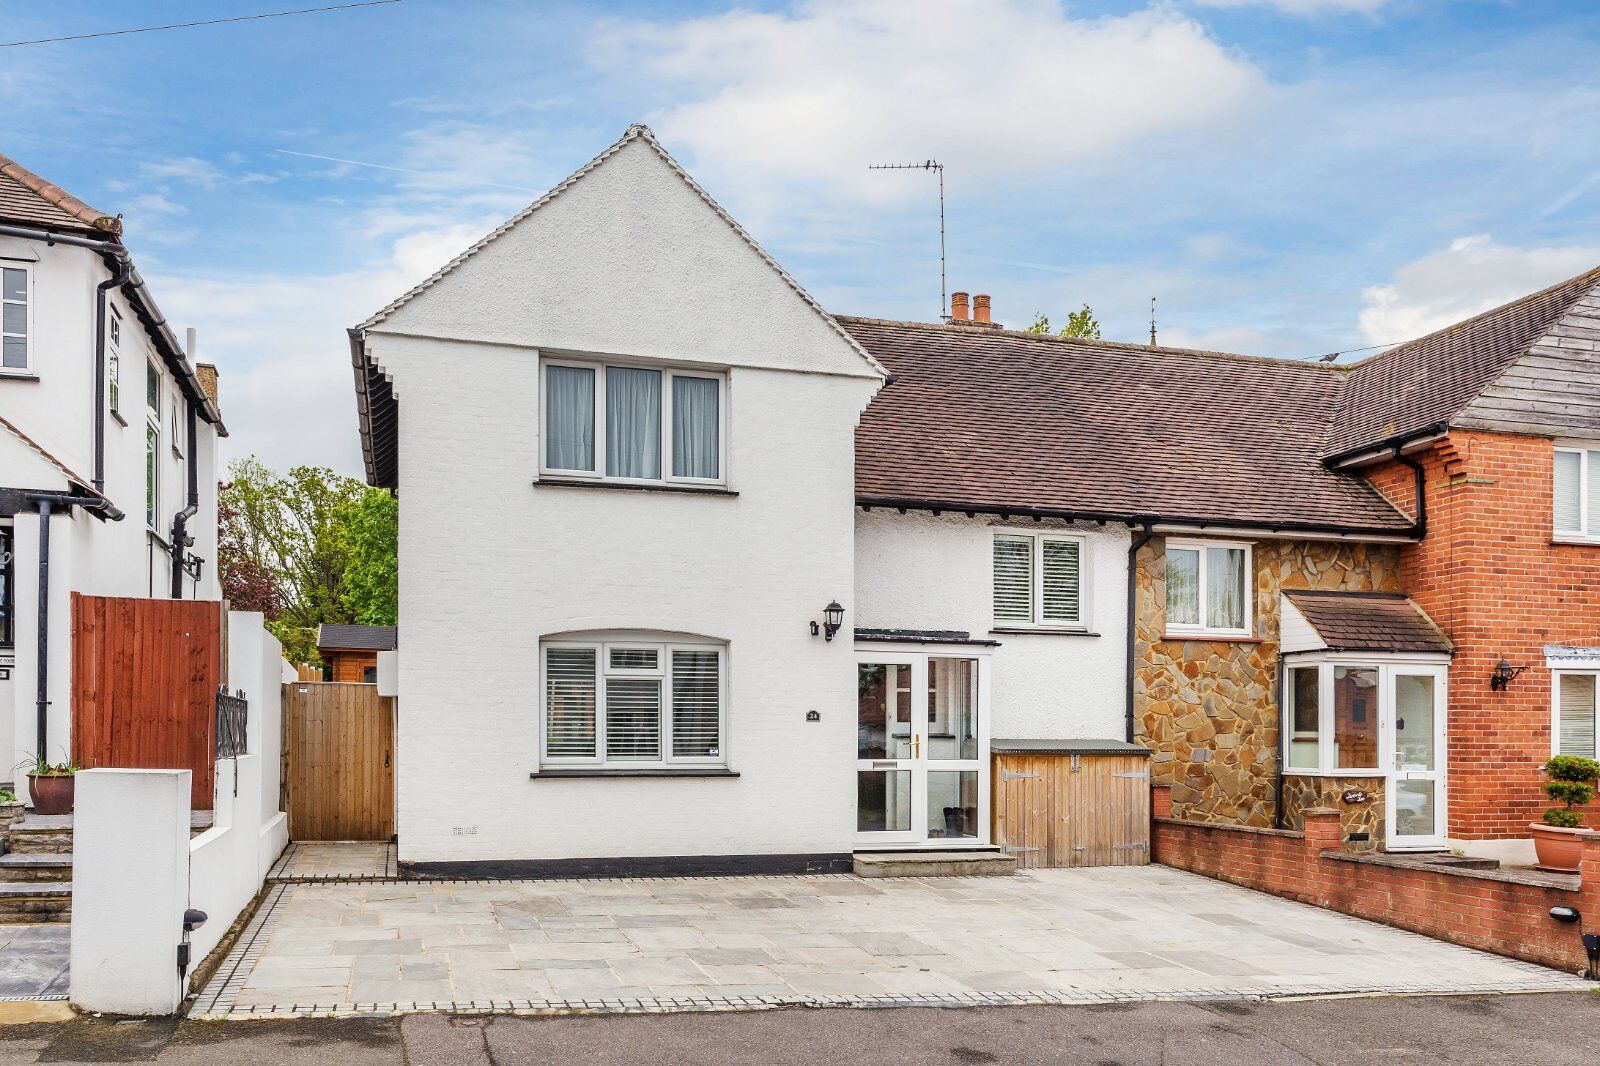 3 bedroom semi detached house for sale Lumley Road, Cheam, SM3, main image